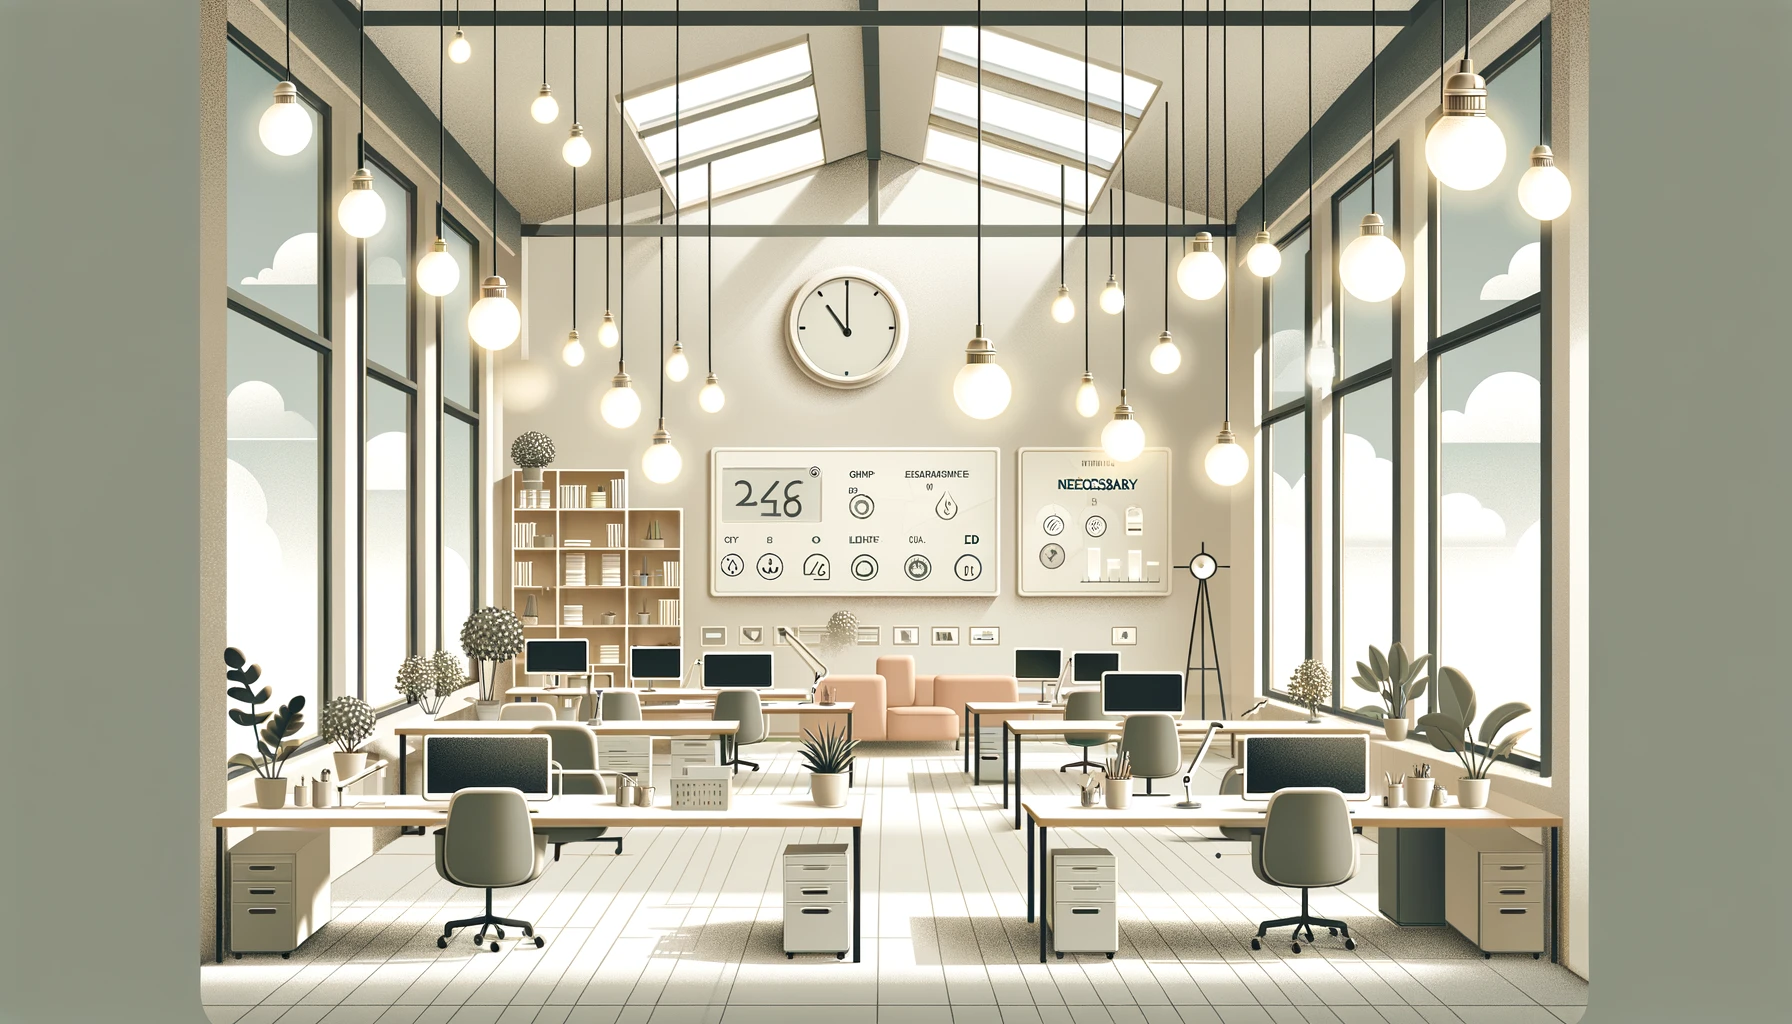 A modern, minimalist office designed for operational efficiency and resource management, featuring large windows for natural light, energy-saving LED bulbs, and a digital display of energy consumption.